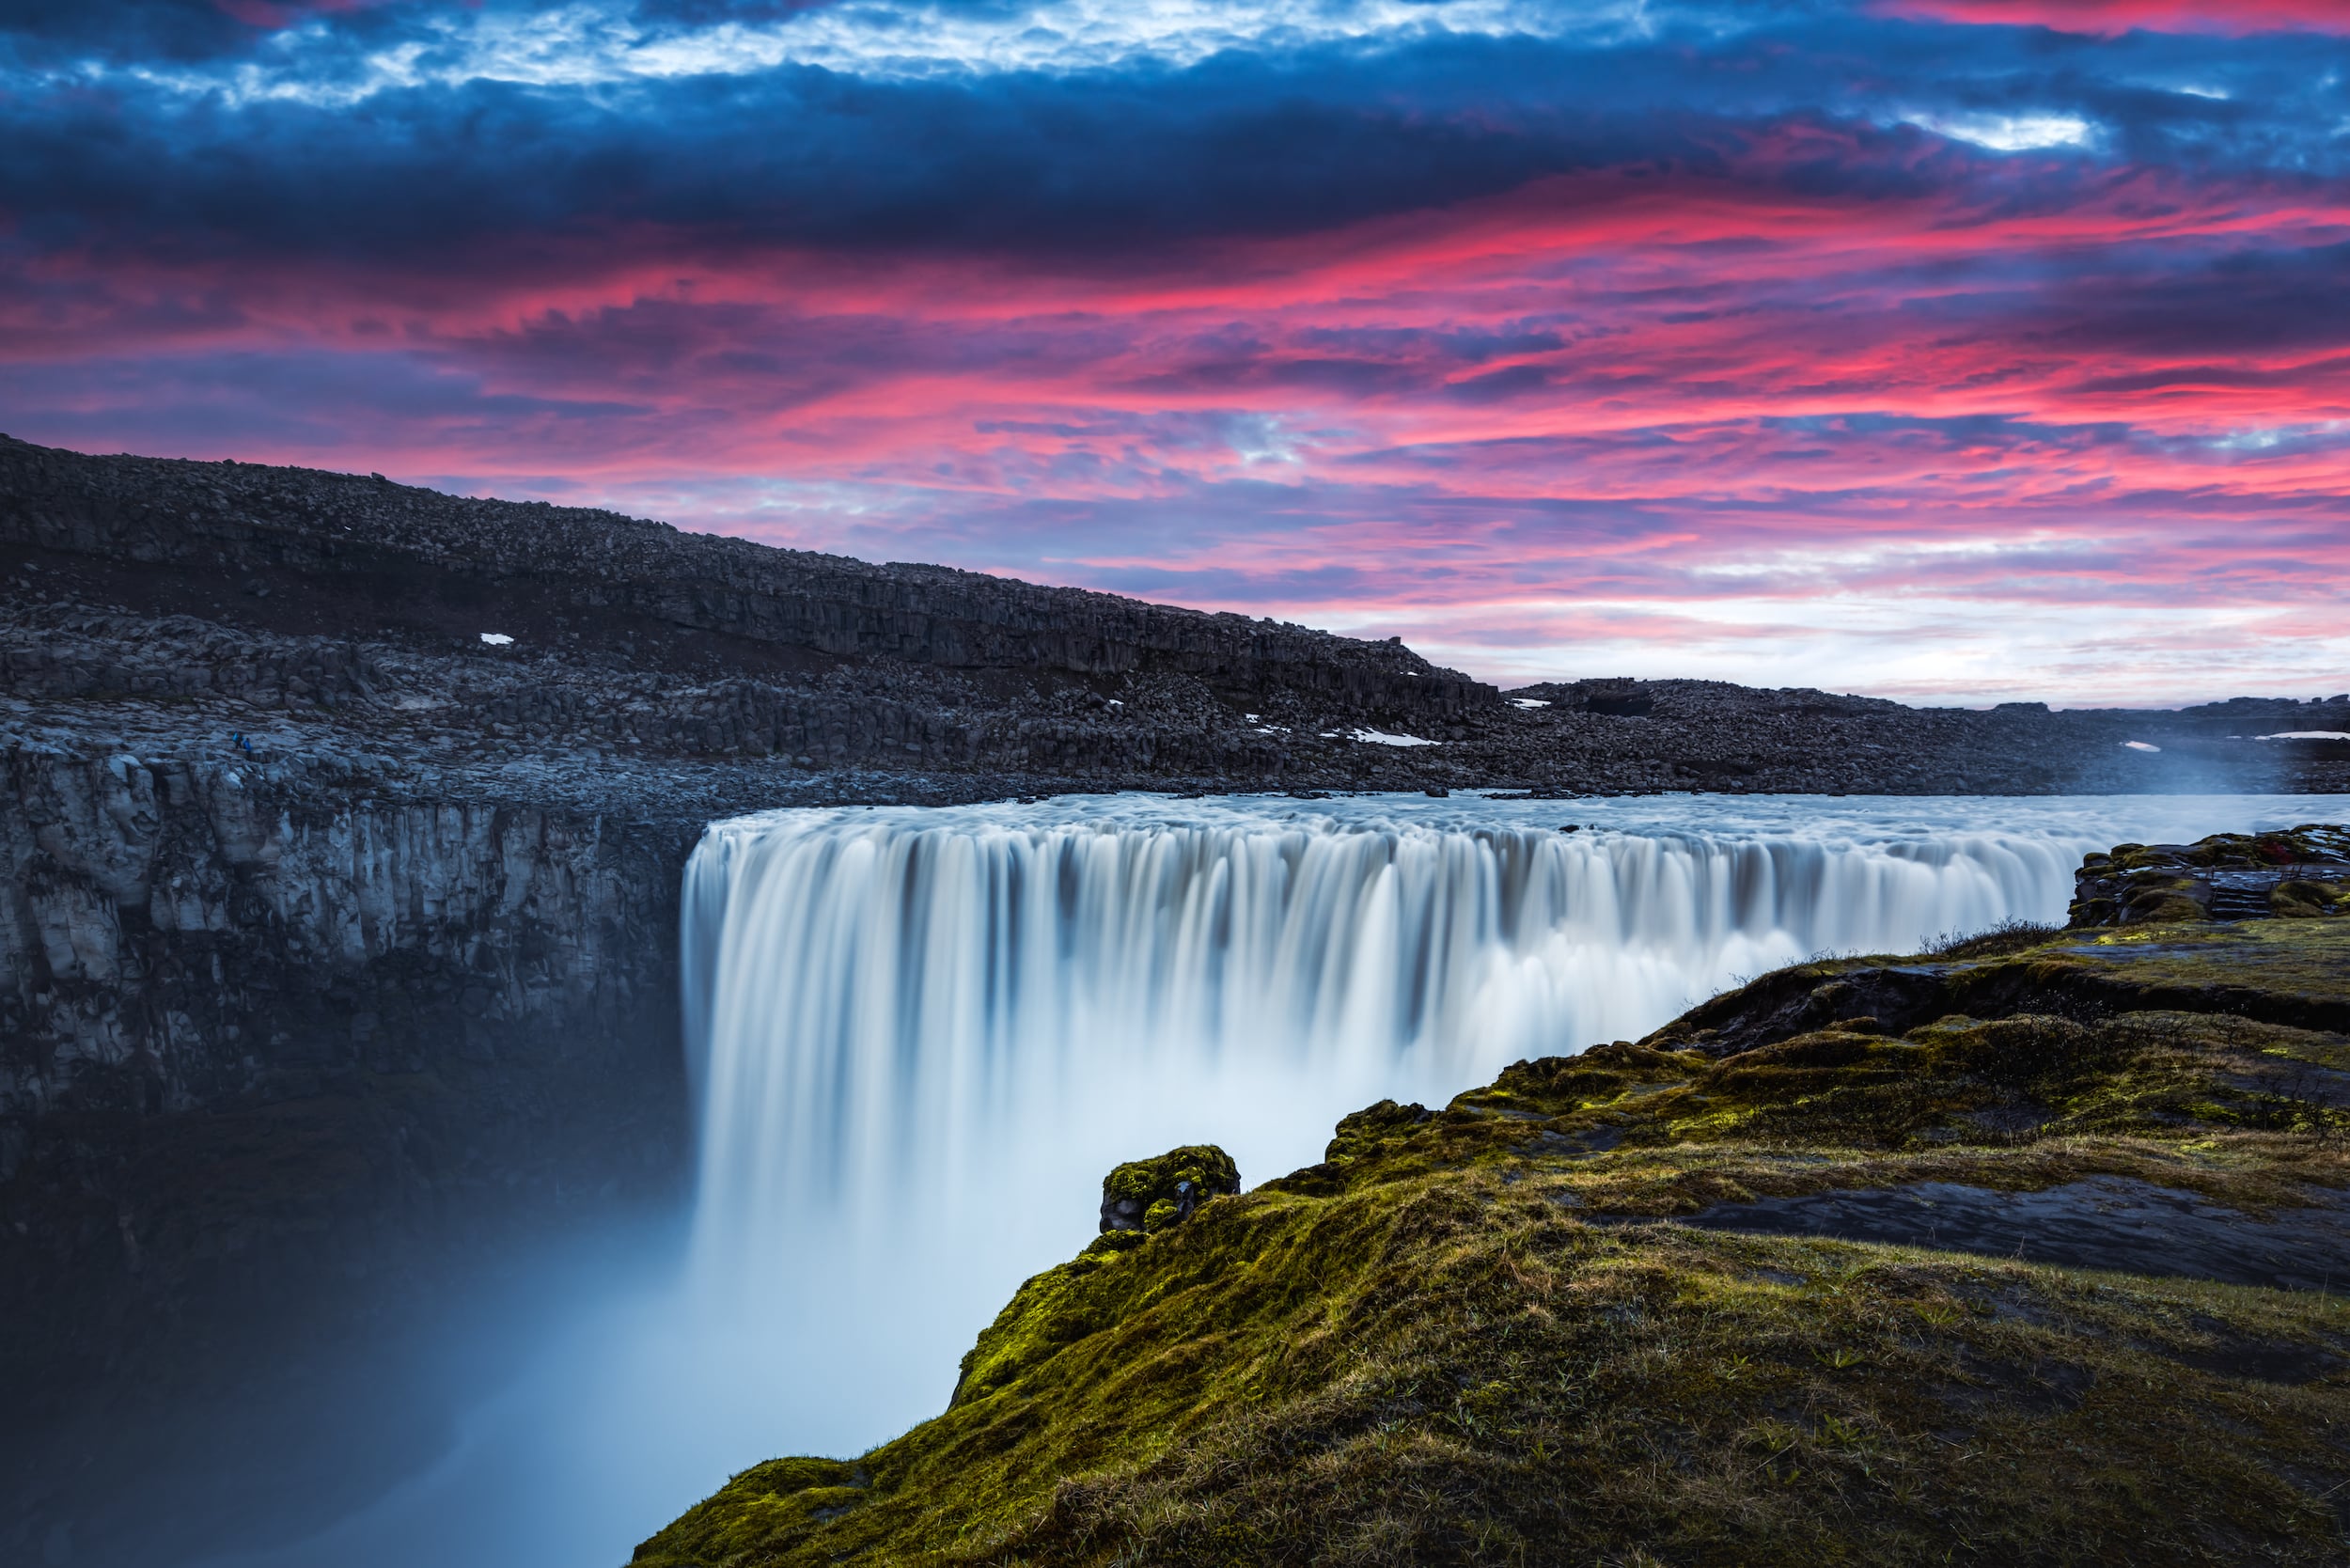 Colorful sunrise over Dettifoss Waterfall in North Iceland.